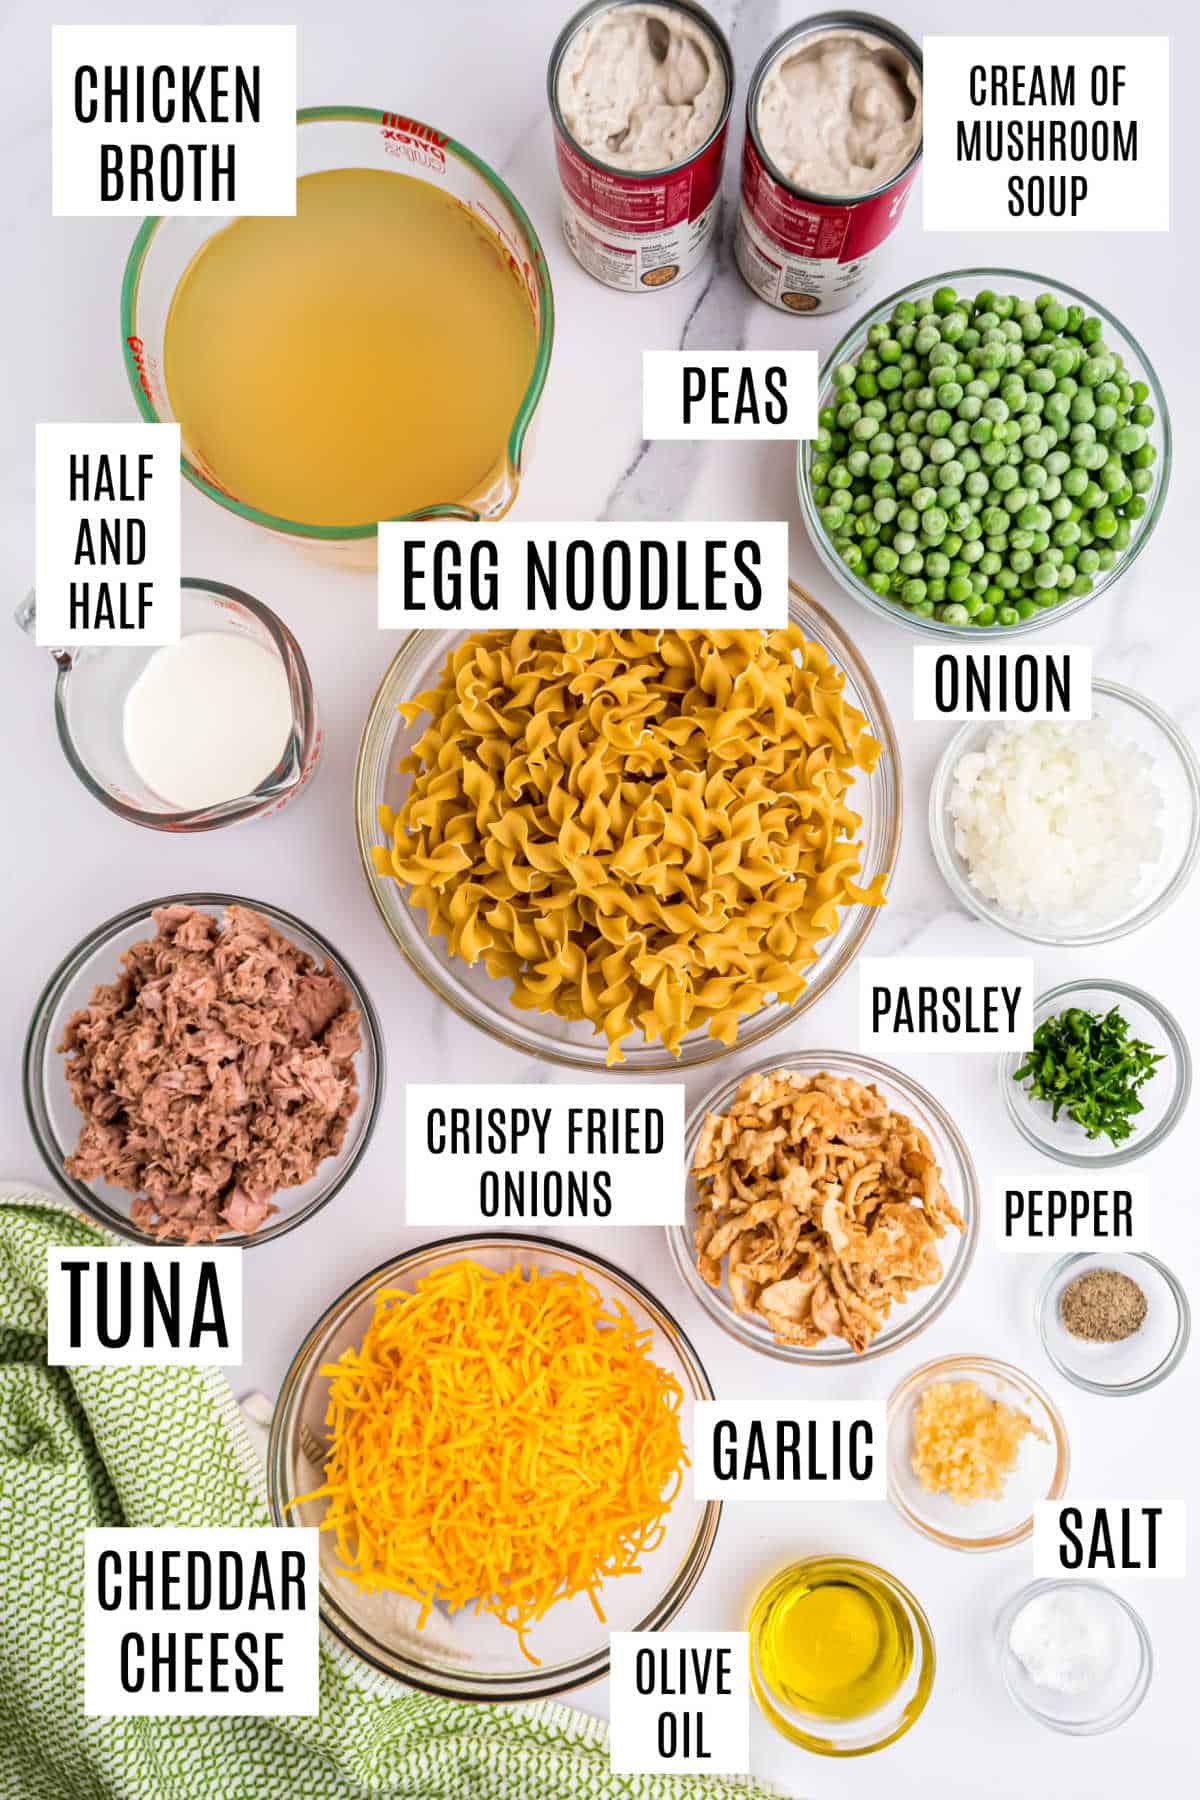 Ingredients needed to make tuna noodle casserole in the Instant Pot.